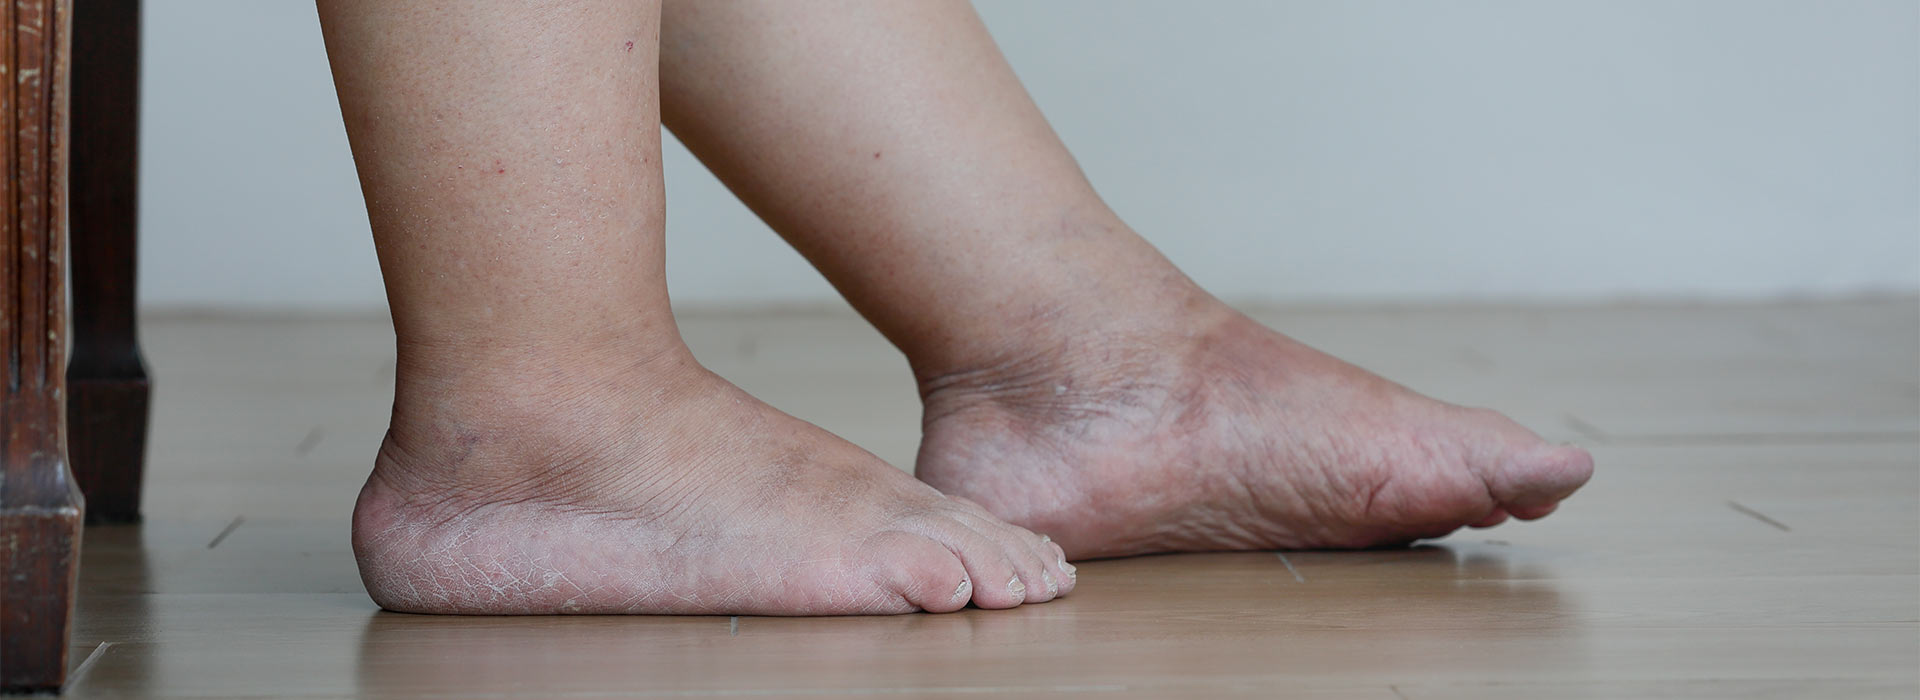 Diabetes Swollen Feet: Causes and Treatments